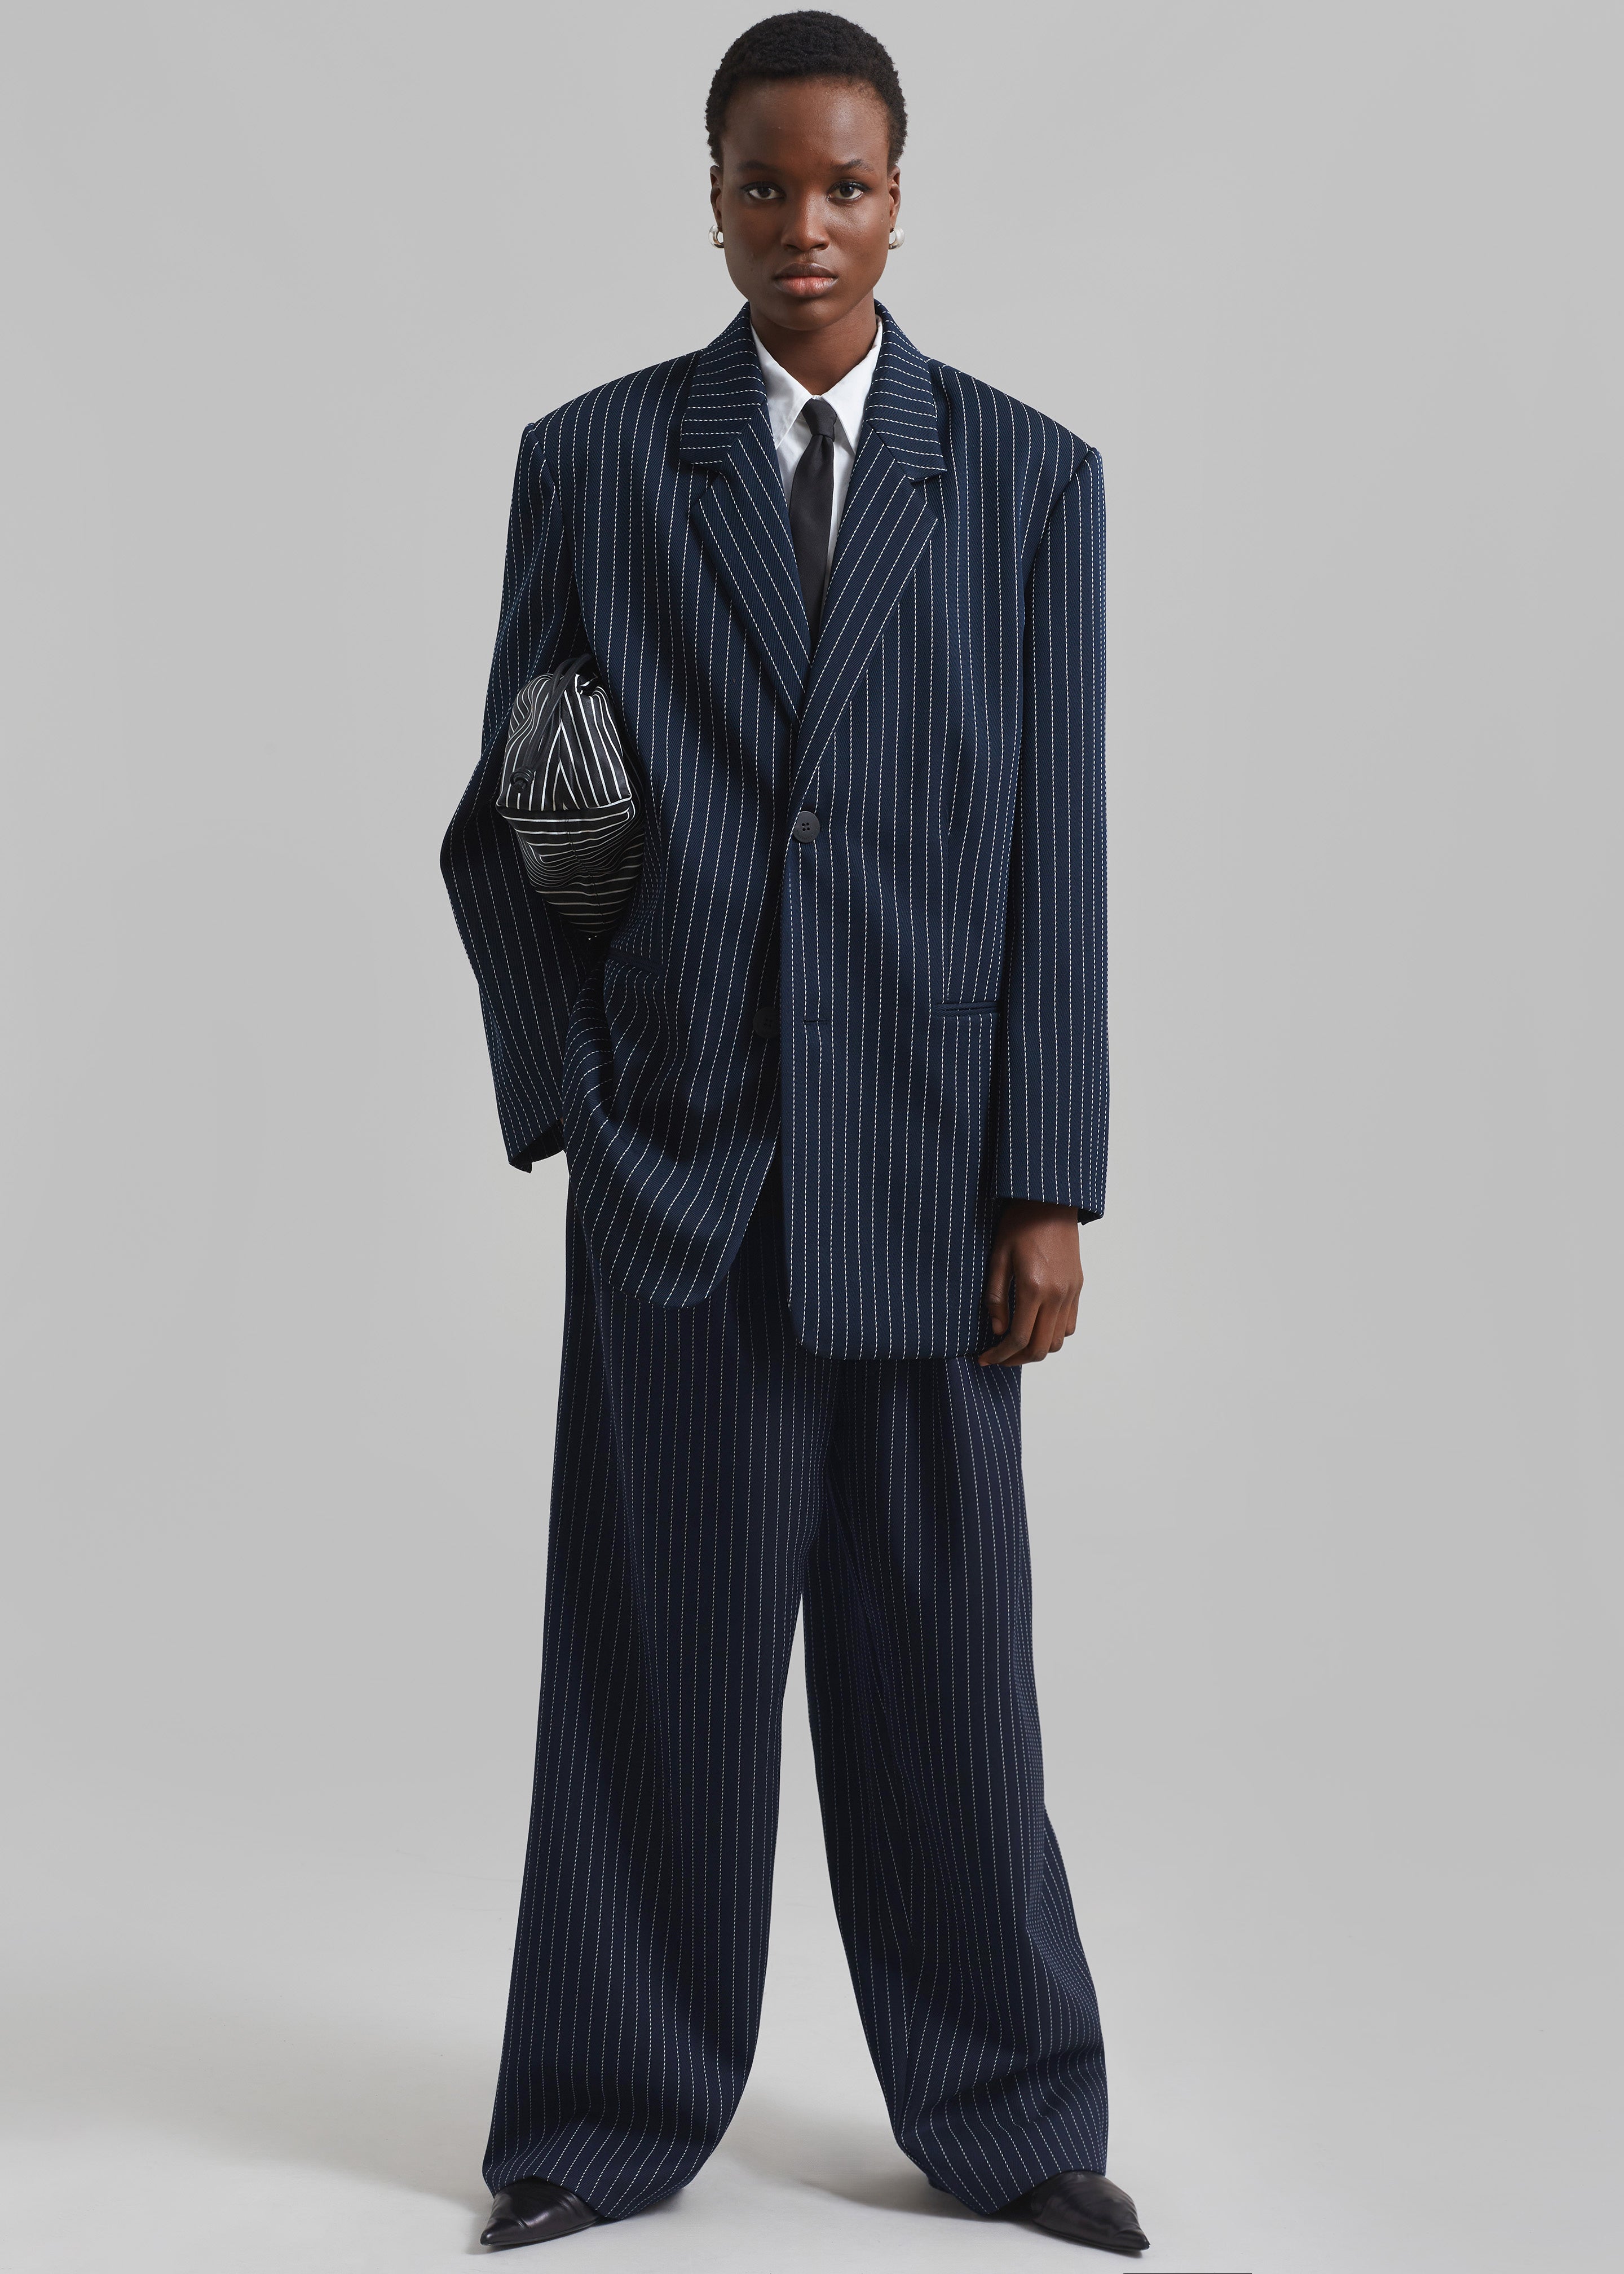 Ripley Pleated Twill Trousers - Navy/White Pinstripe - 9